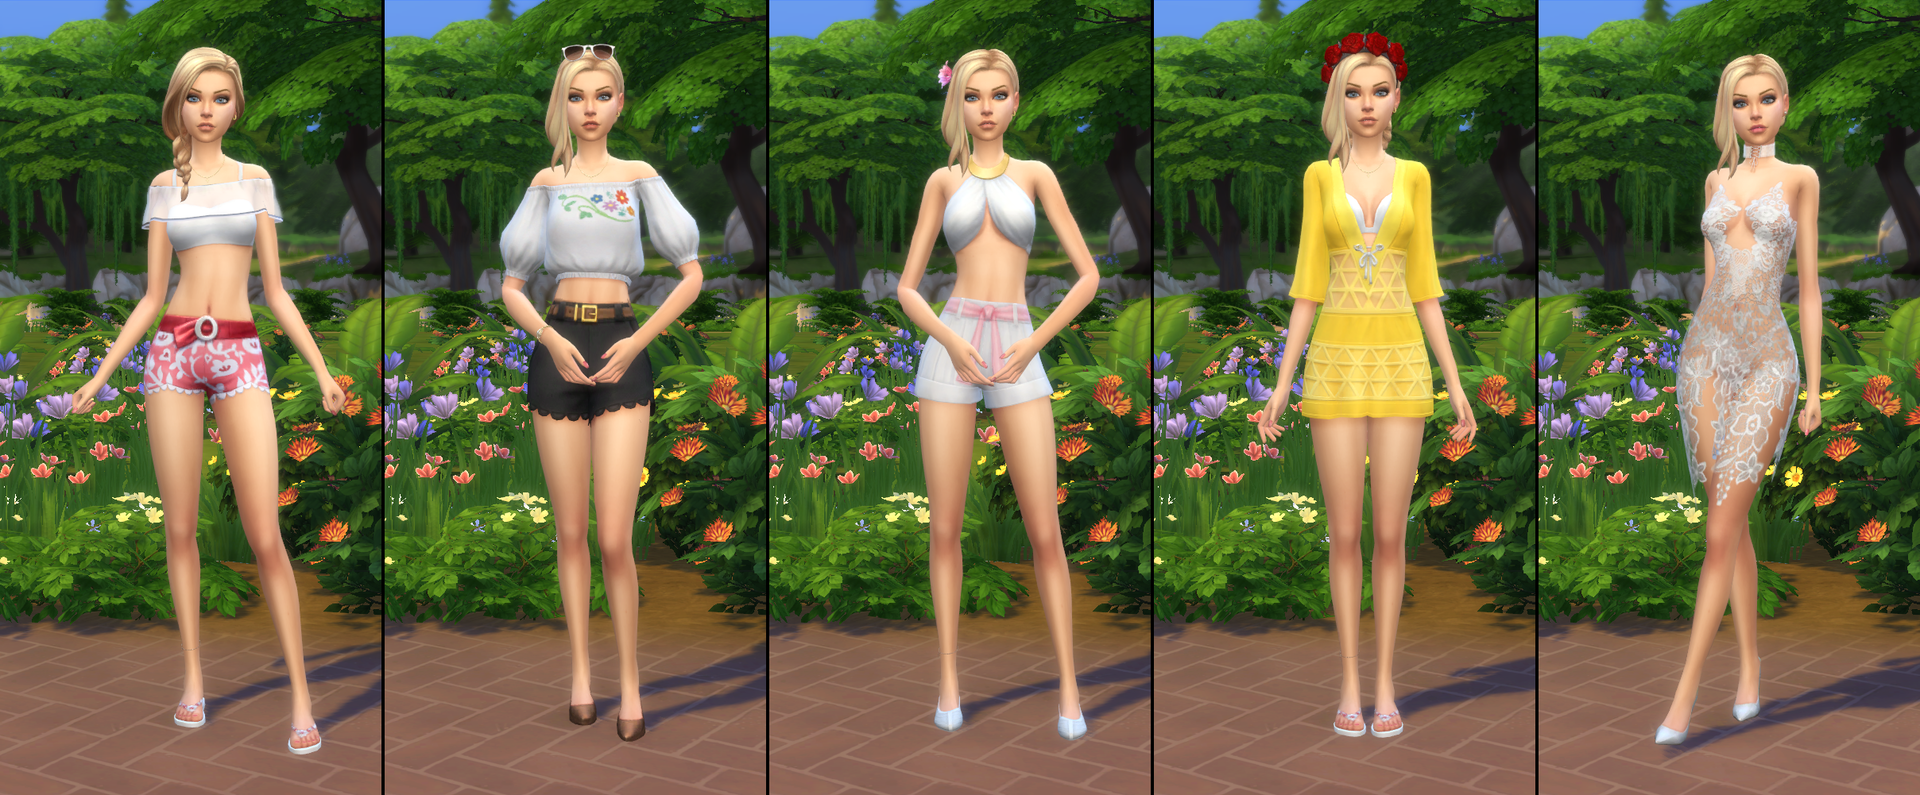 Sims 4 Erplederps Hot Sims Sexy Sims For Your Whims 220820 Added Brigitte Lindholm